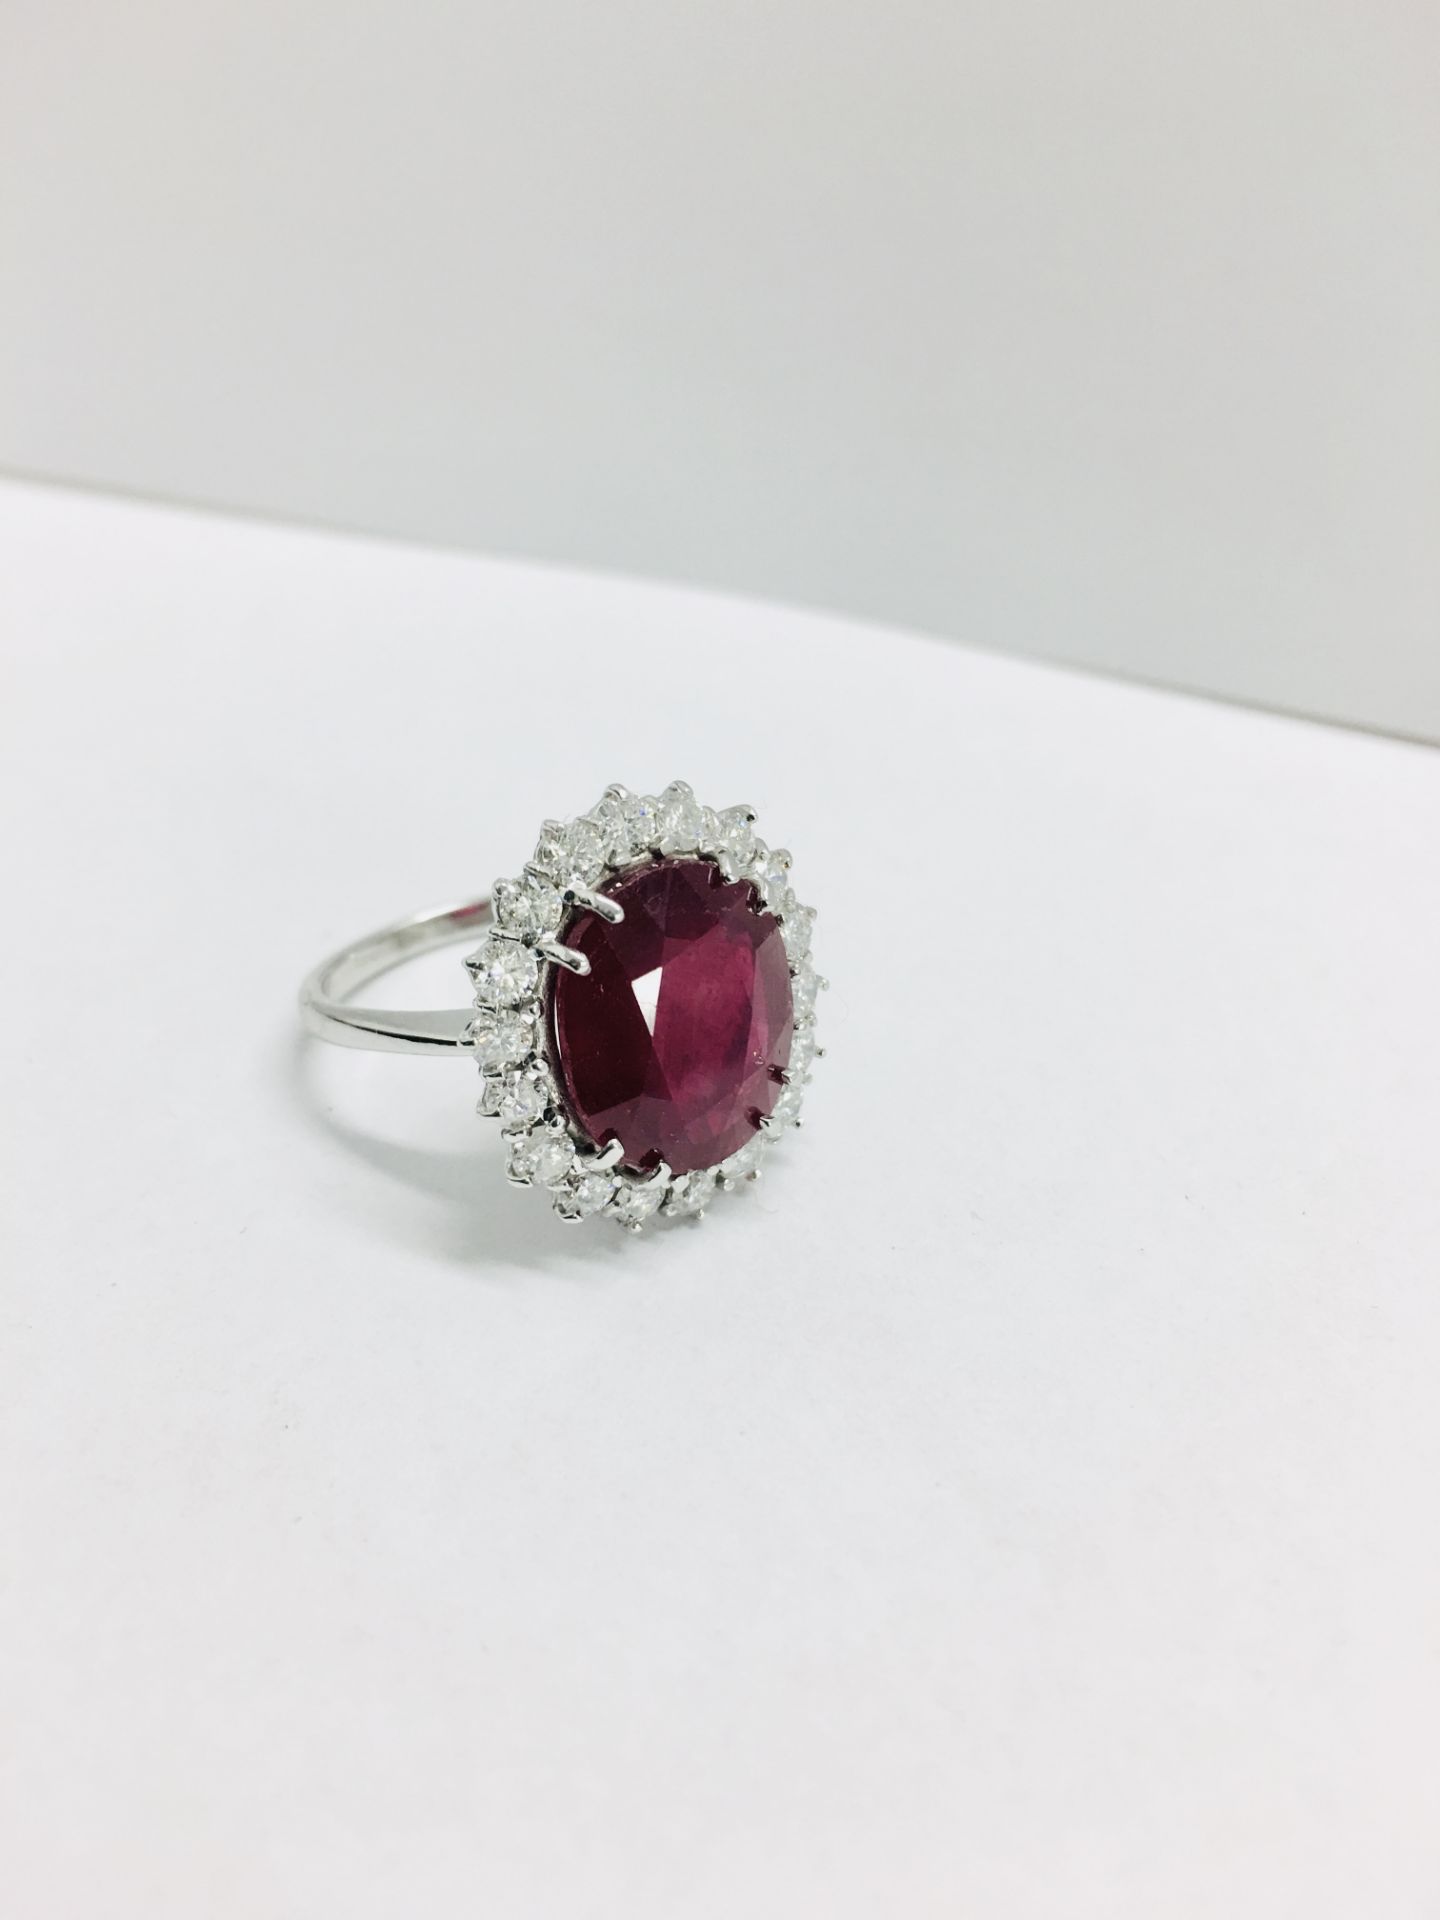 10Ct Ruby And Diamond Cluster Ring. - Image 3 of 11